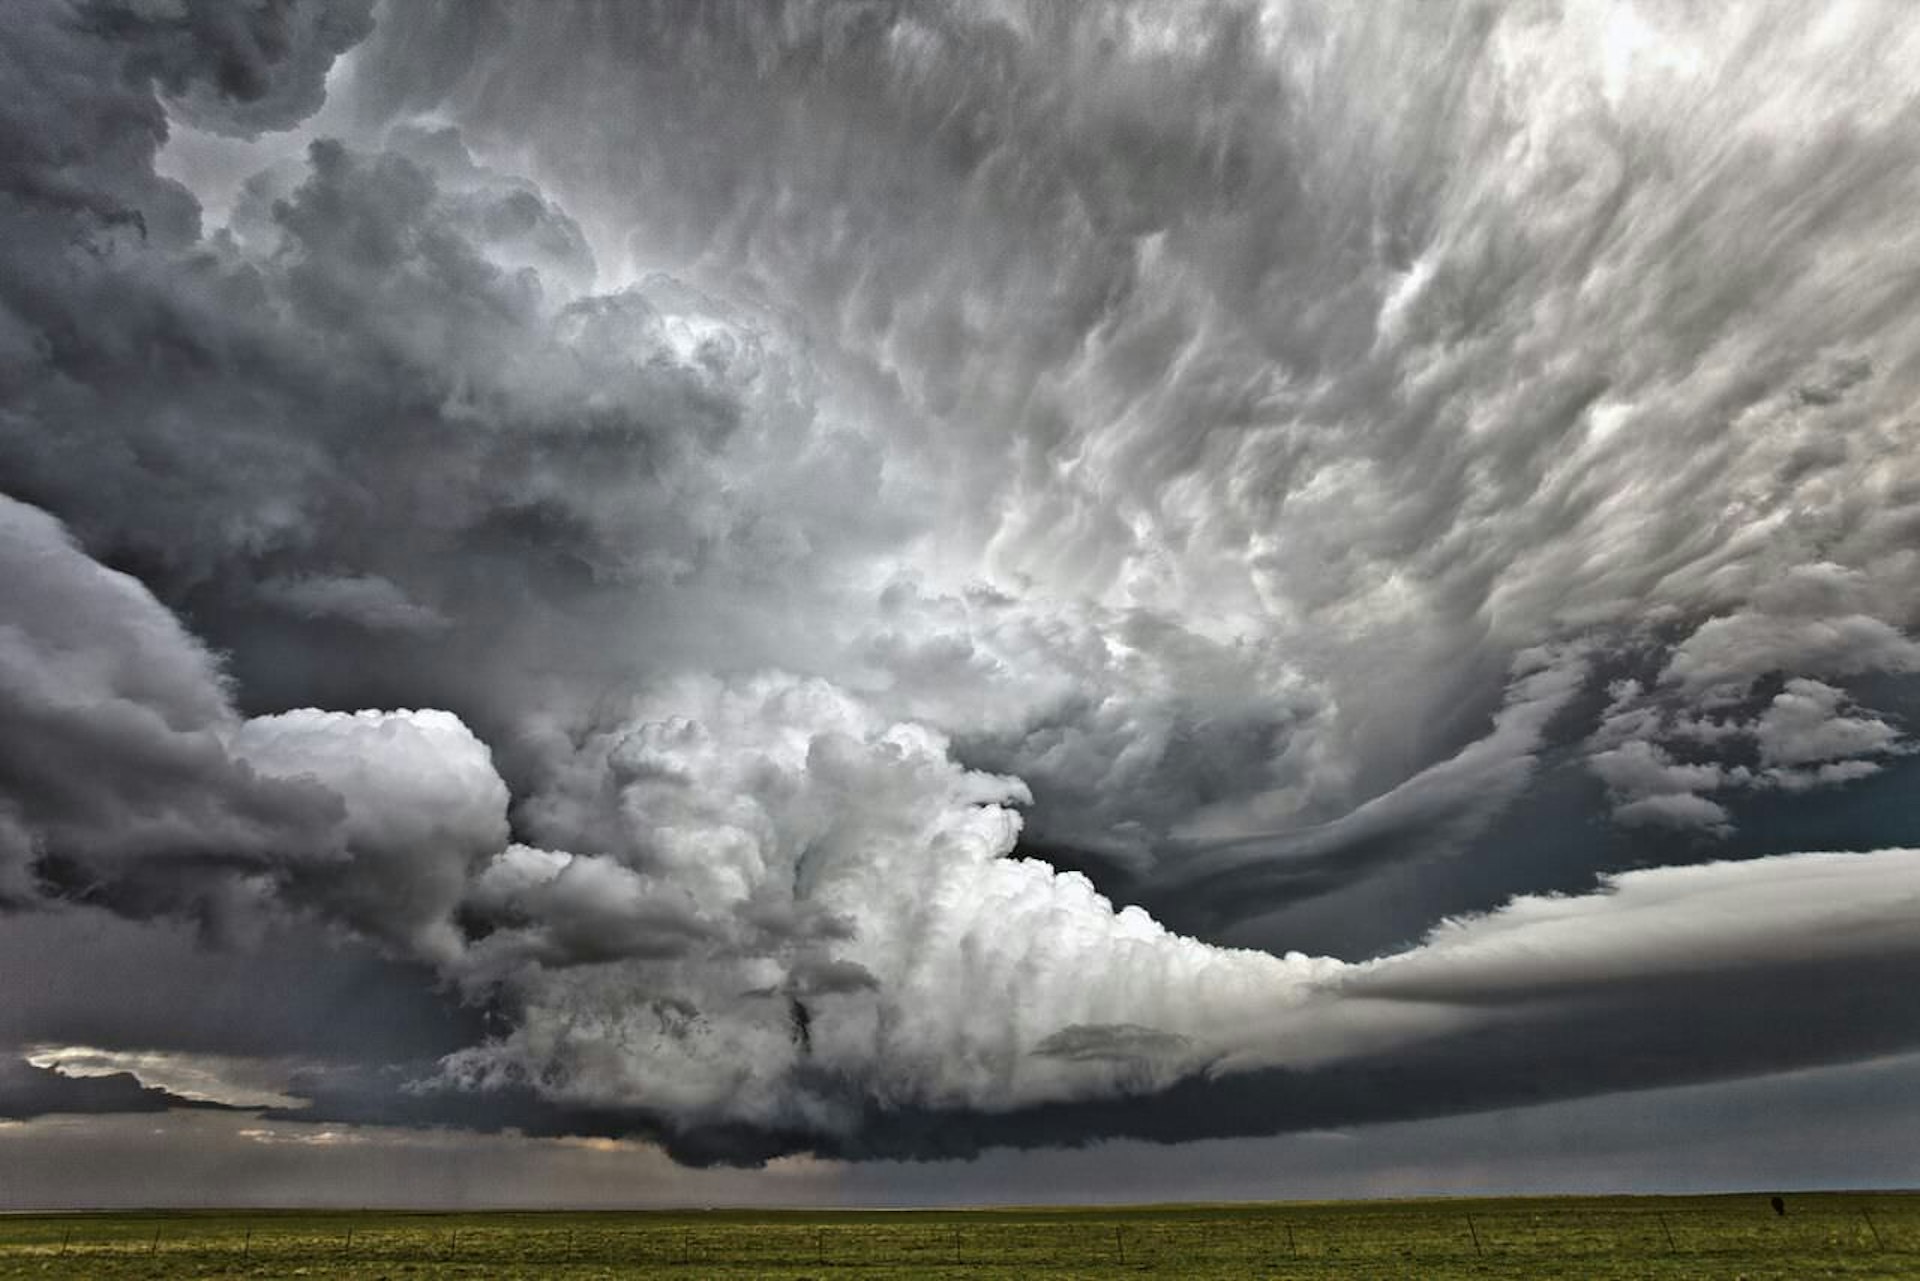 *** EXCLUSIVE *** COLORADO, USA - JUNE 4: Brian, the photographer snaps an elaborate storm cloud formation on June 4, 2015 in Colorado, USA. FEARLESS photographer has dedicated his life to chasing storms after a tornado almost killed him on the way to his high school prom in 1993. Kansas native Brian Barnes, 39, was raised in the beating heart of North America's 'Tornado Alley' - and was also struck by lightning as a teenager. Taken by tour guide Brian in Colorado, these incredible pictures show giant supercell storms - one of the most powerful weather formations found over land. Also known as rotating thunderstorms, supercells can produce winds over 100mph and can uproot trees and obliterate buildings. Brian, who runs an extreme weather tour company, captured these images in June 2015, and was intimately acquainted with ferocious storms from a young age. PHOTOGRAPH BY Brian Barnes / Barcroft Media UK Office, London. T +44 845 370 2233 W www.barcroftmedia.com USA Office, New York City. T +1 212 796 2458 W www.barcroftusa.com Indian Office, Delhi. T +91 11 4053 2429 W www.barcroftindia.com (Photo credit should read Brian Barnes / Barcroft Media / Barcroft Media via Getty Images)